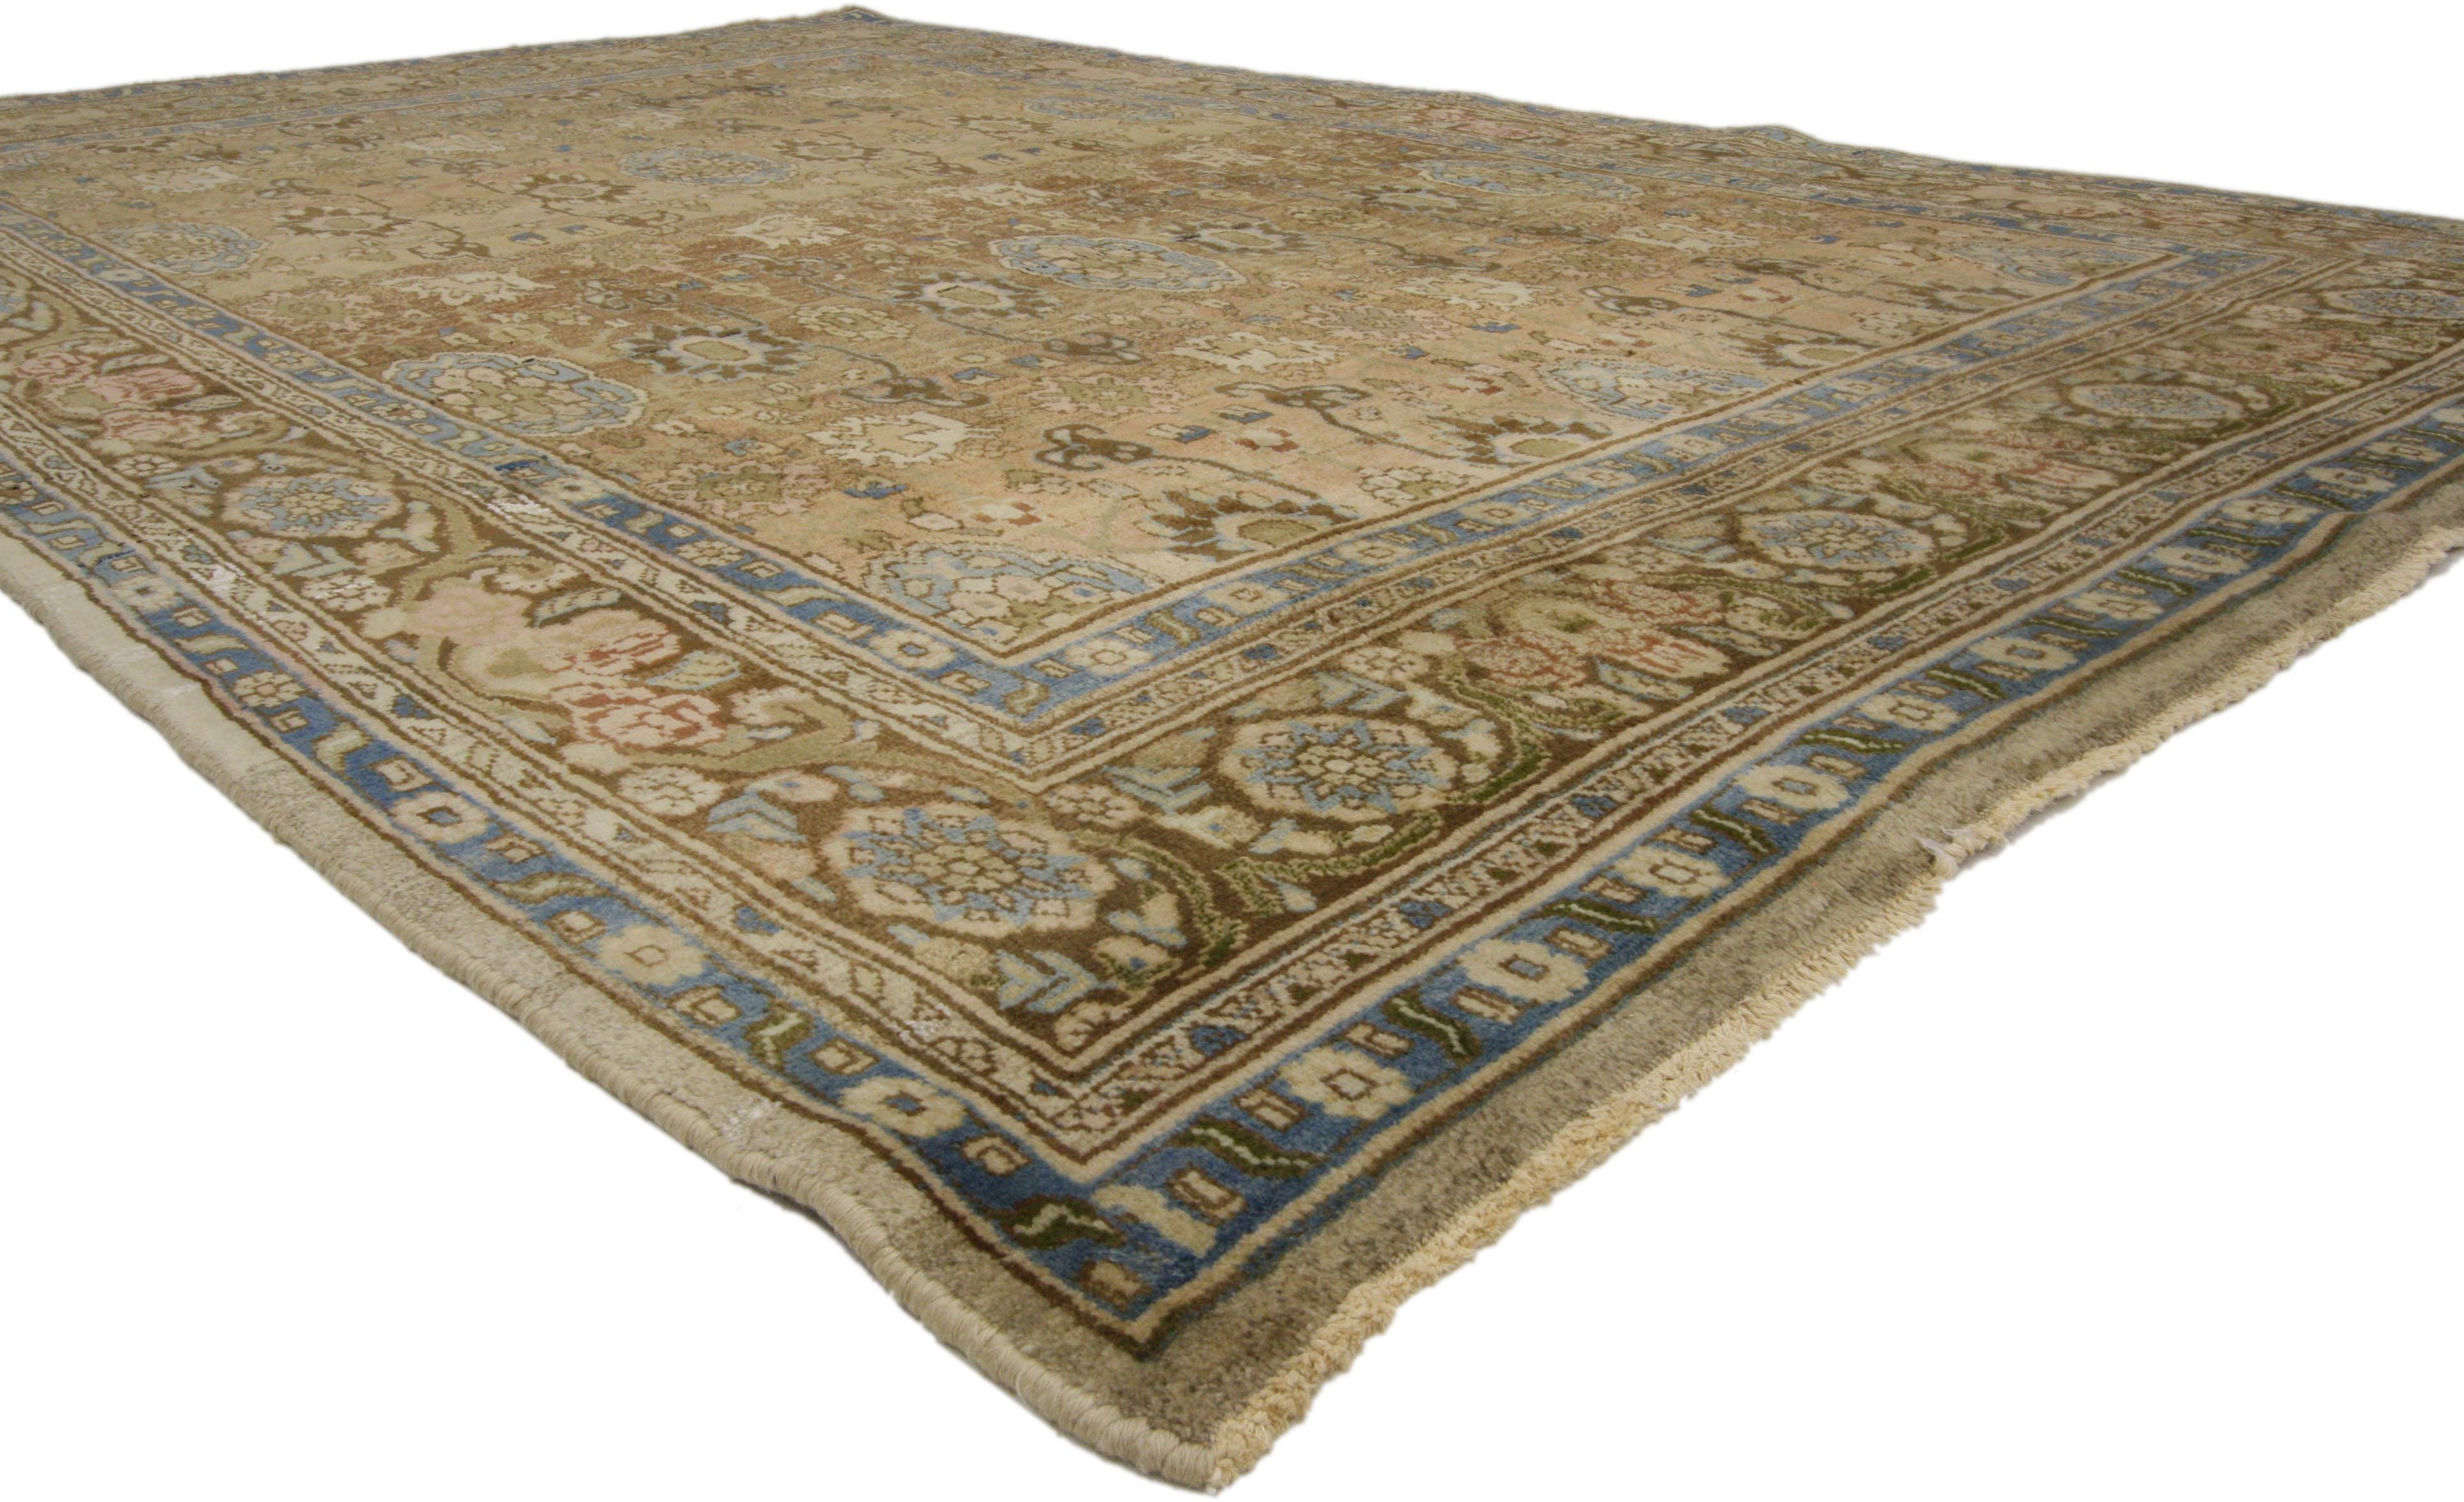 75966 Vintage Persian Hamadan Rug 06'09 x 10'11. Warm and inviting, this hand-knotted wool vintage Persian Hamadan rug features an all-over botanical pattern decorated with flowers, stylized foliate motifs, and medallions. It is enclosed with a